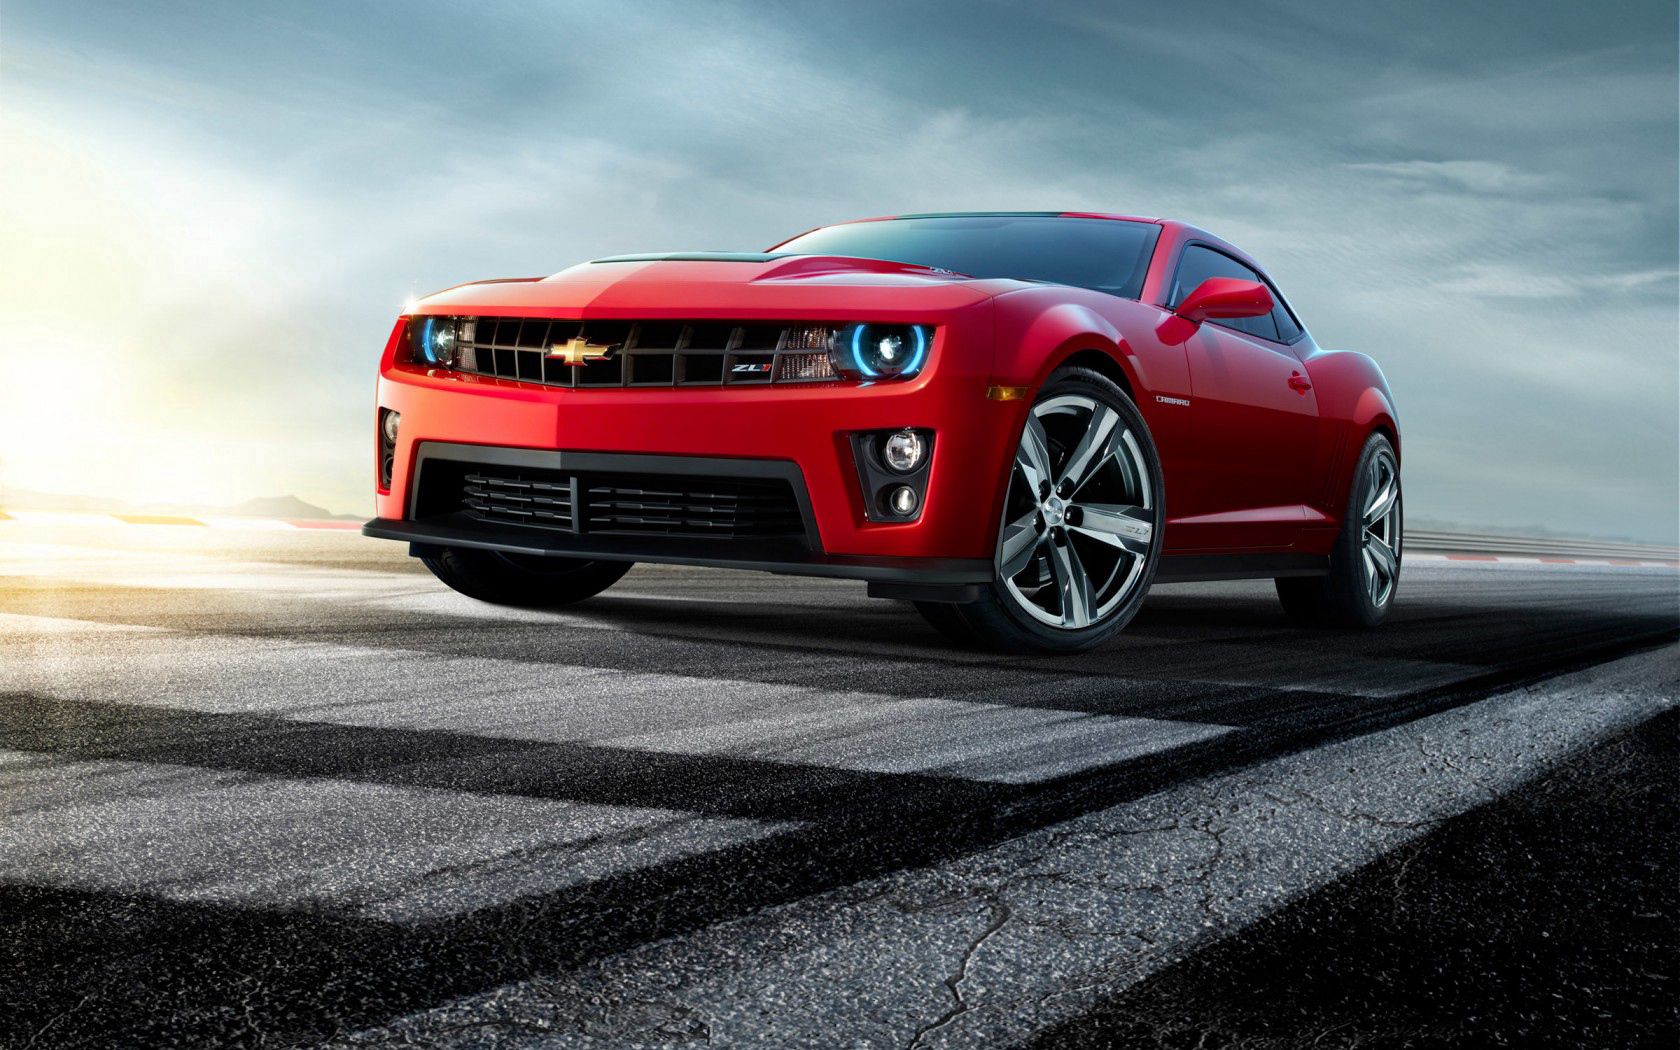 cars, chevrolet, red, front view, camaro Full HD